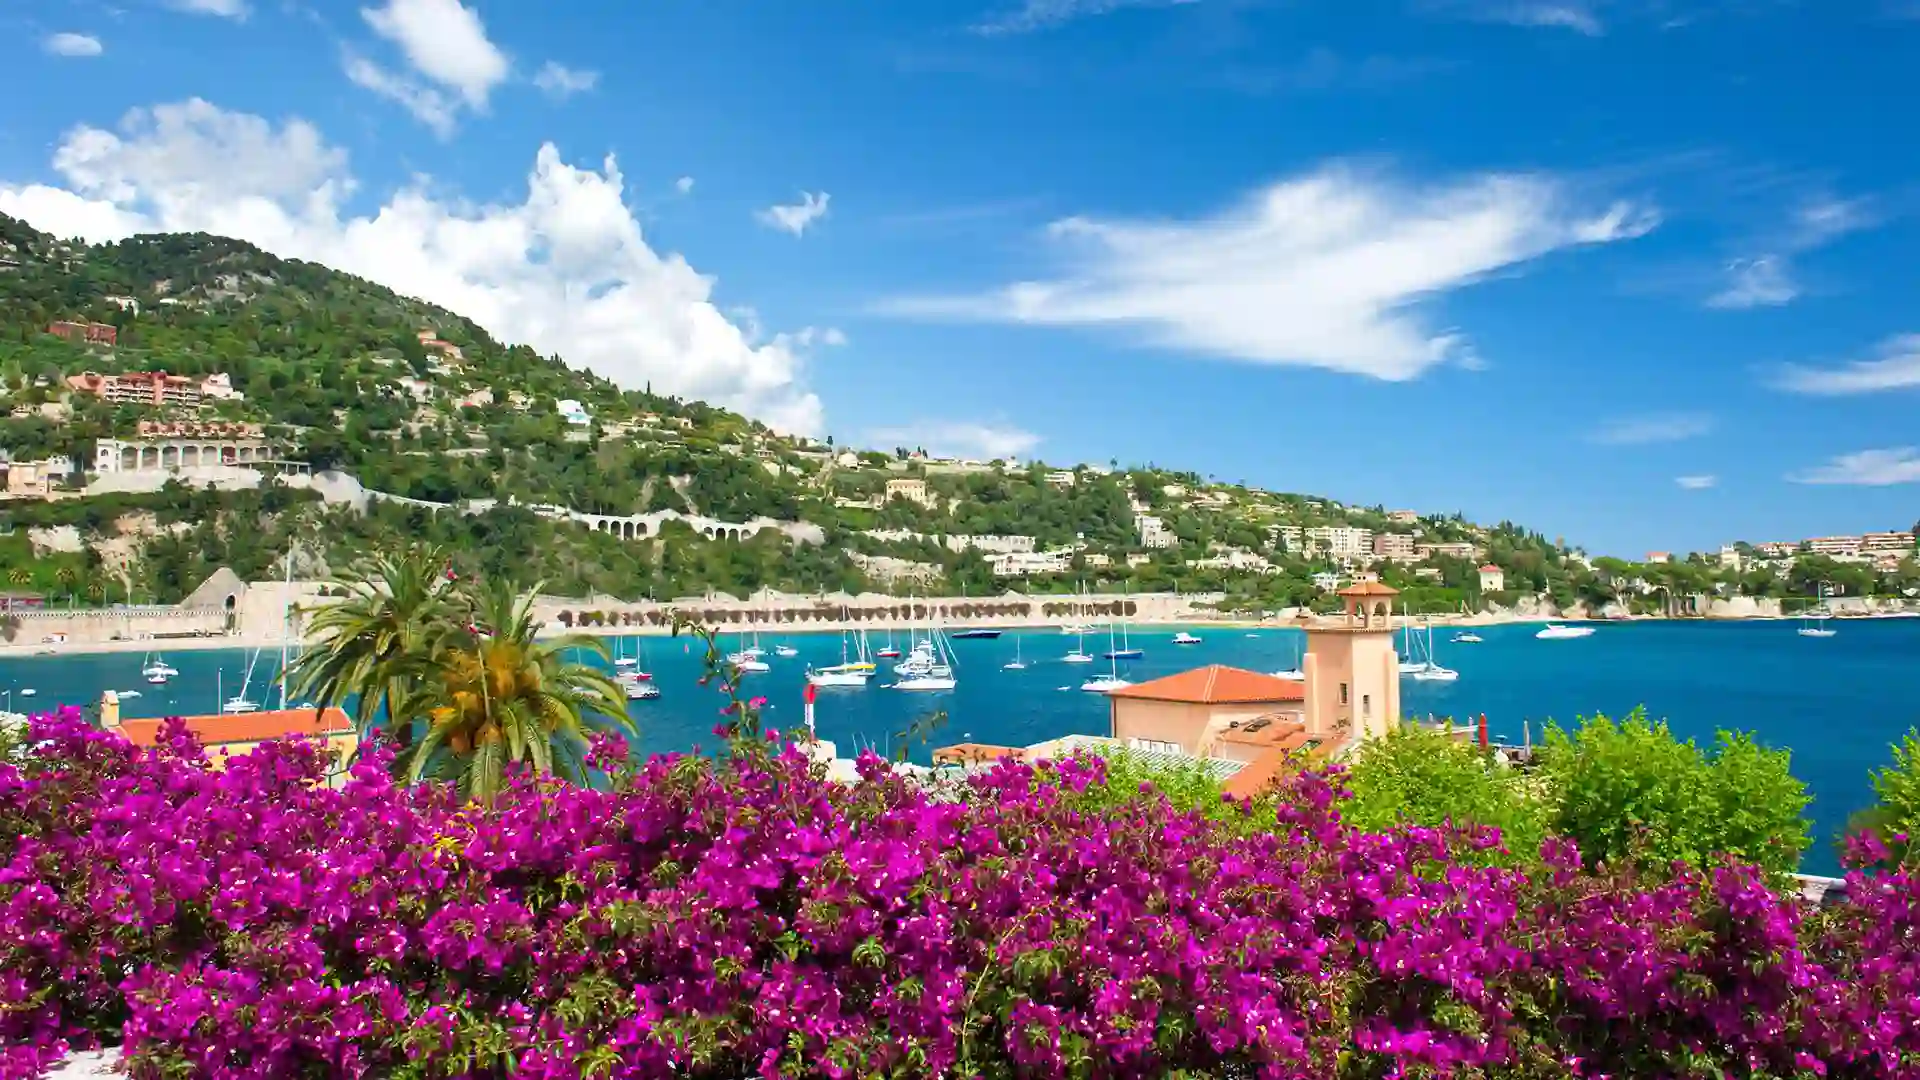 View of purple flowers and green hillside along blue ocean shore where boats are sailing.